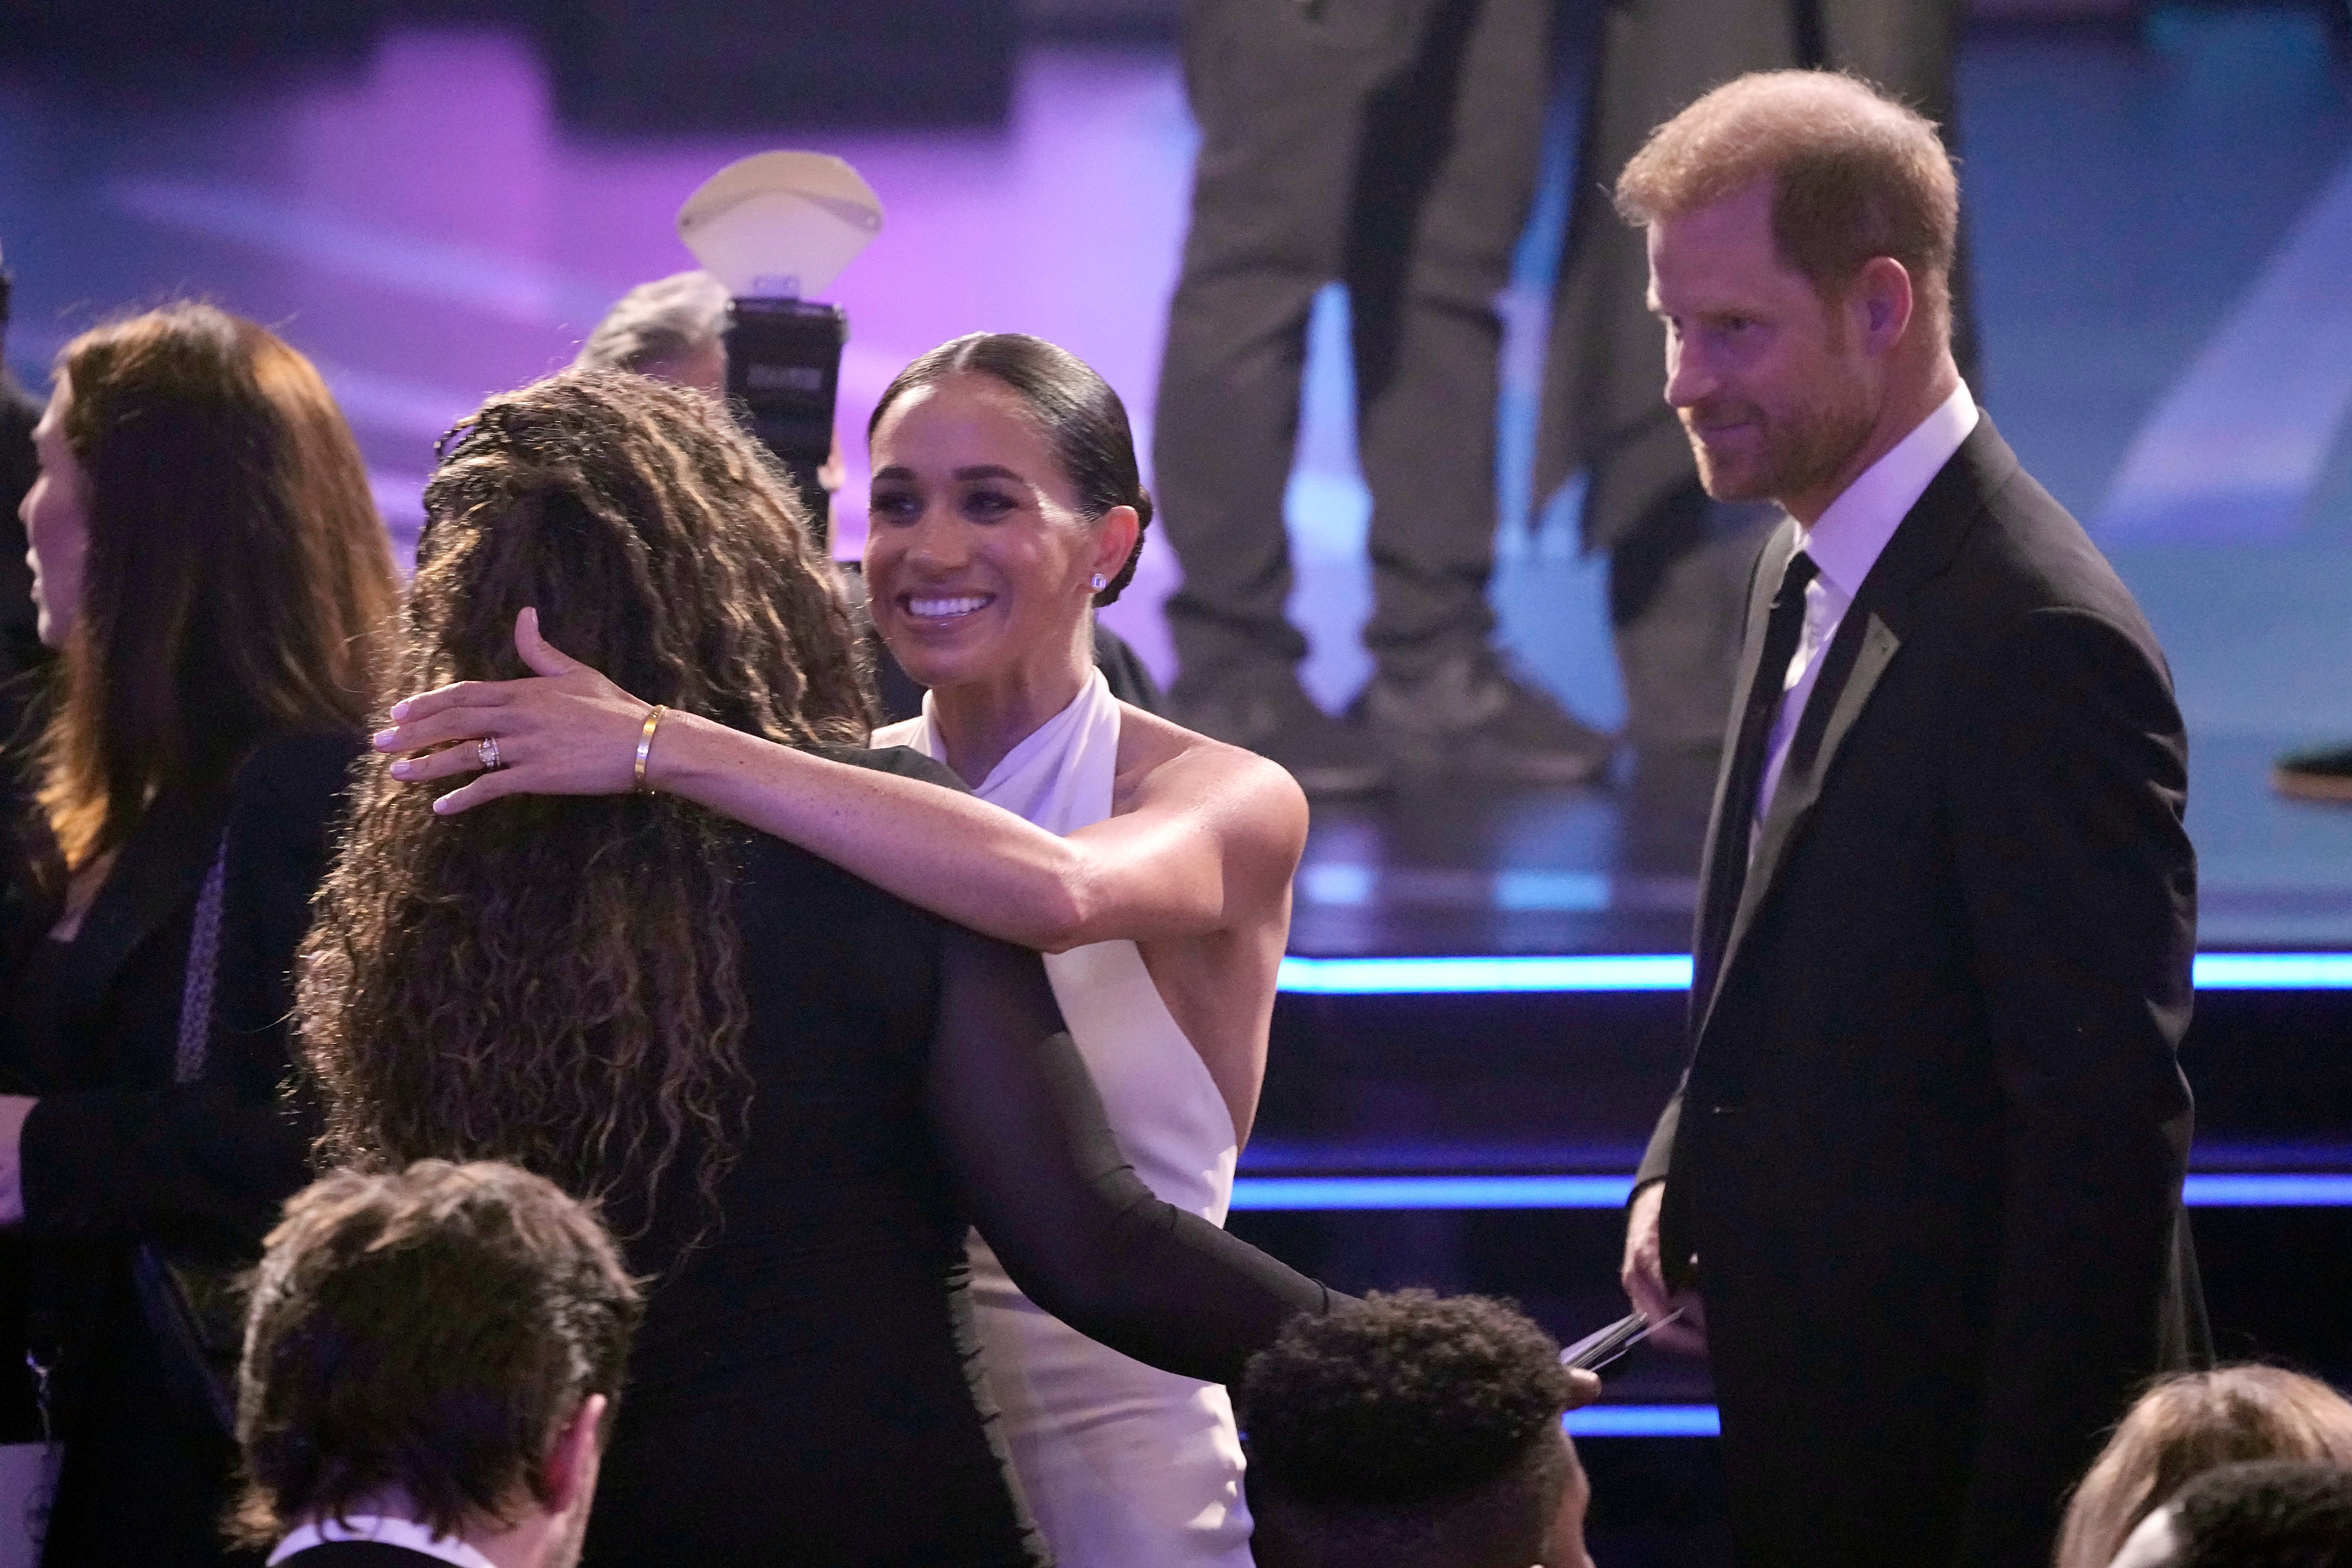 Meghan Markle was also in attendance at the ceremony in Los Angeles.